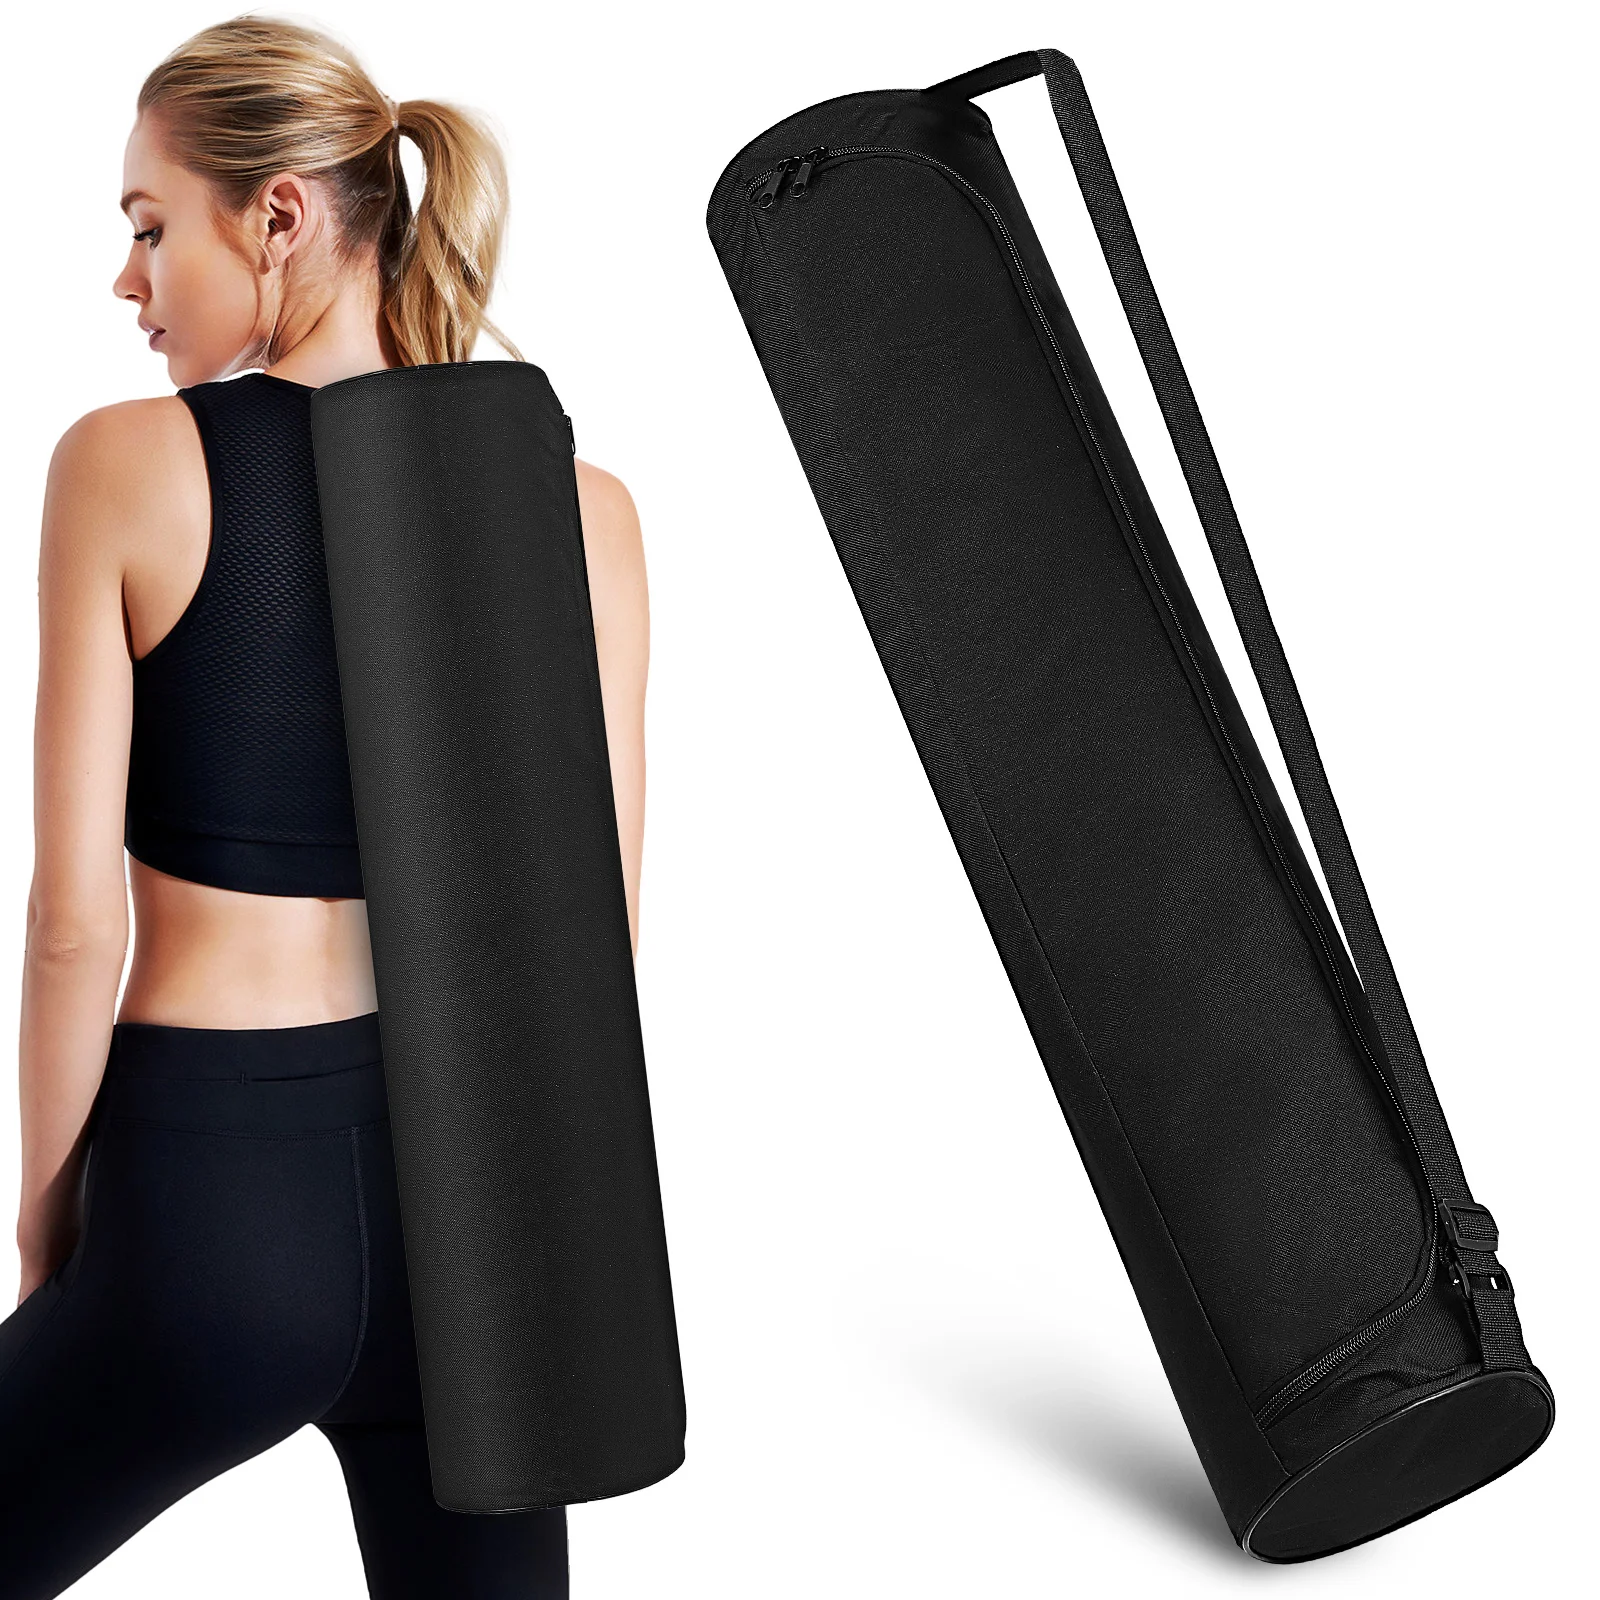 

Yoga Mat Holder Bag Bag Yoga Mat Food Bags For Women Thicken Oxford Cloth Pilates Carrying Case Storage Holder